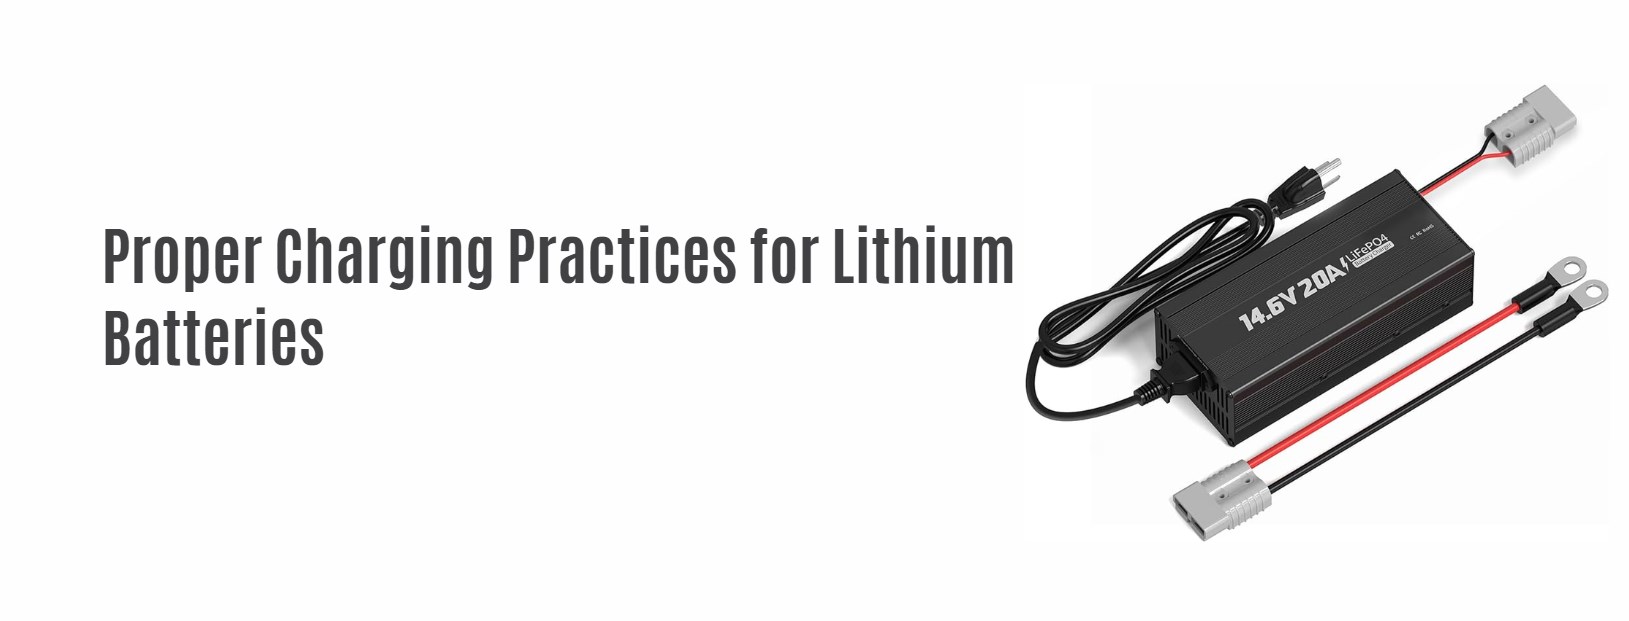 Proper Charging Practices for Lithium Batteries